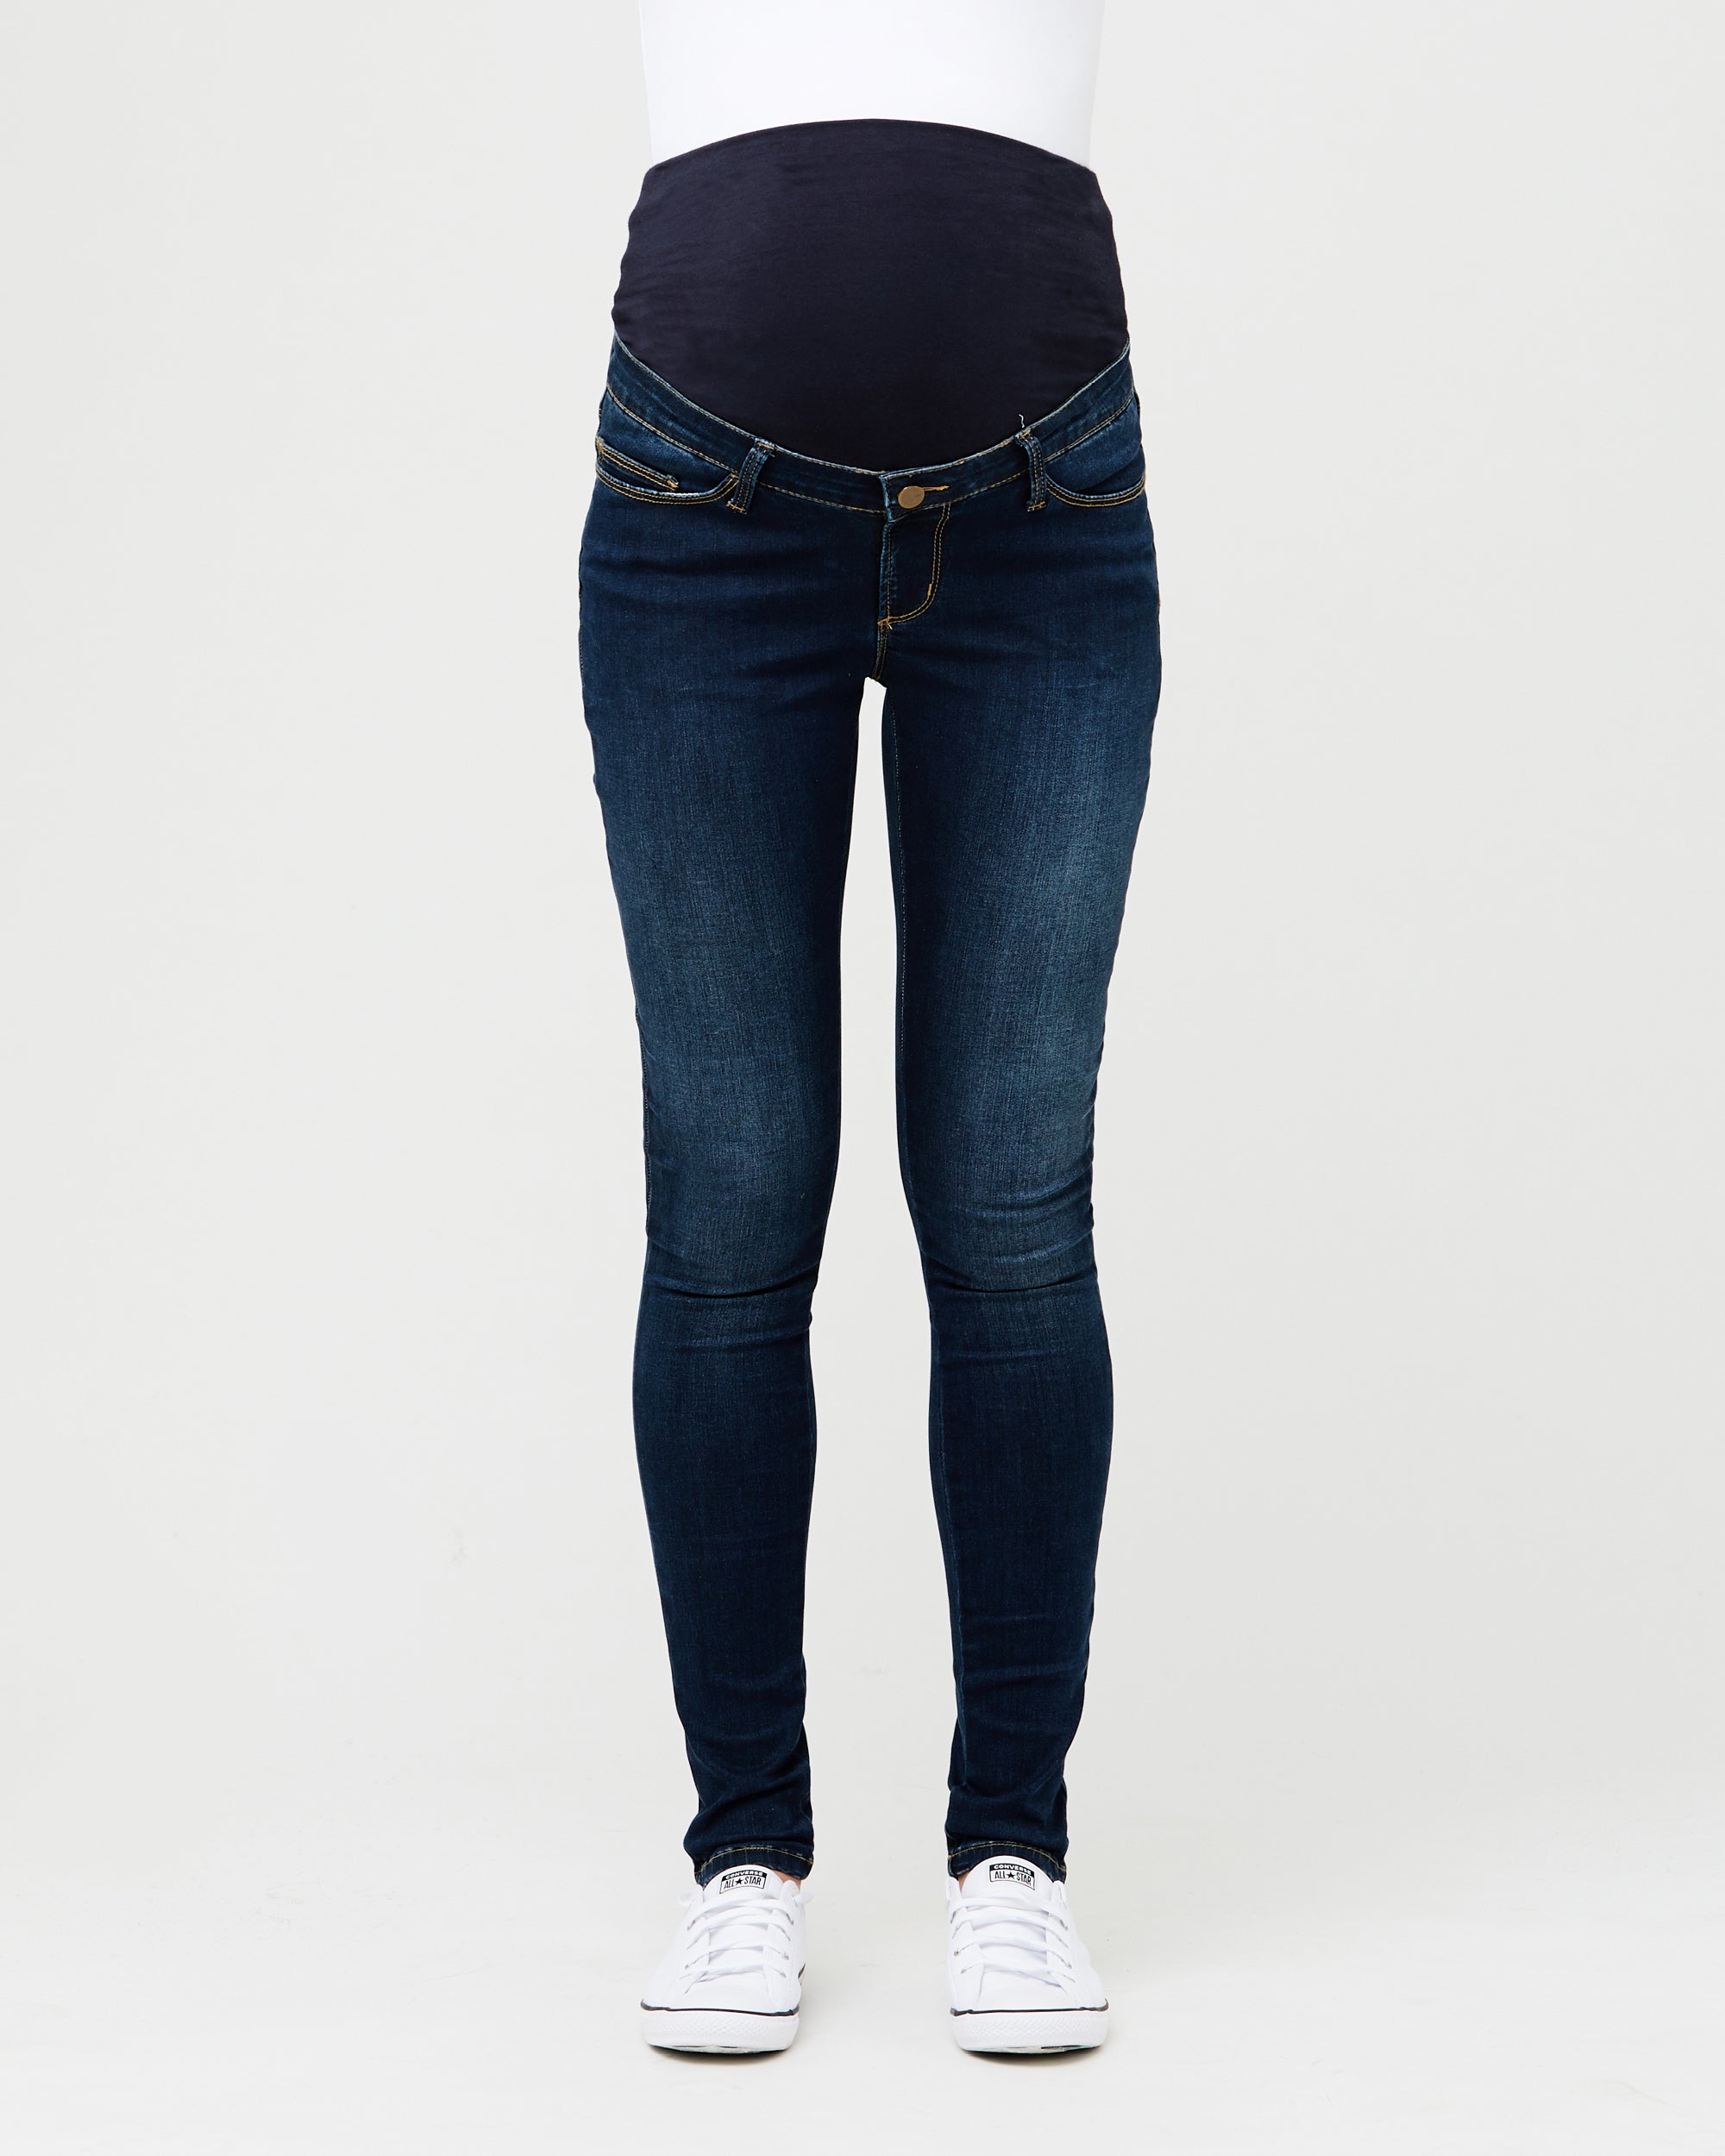 The Pairs Of Pregnancy Jeans We Love